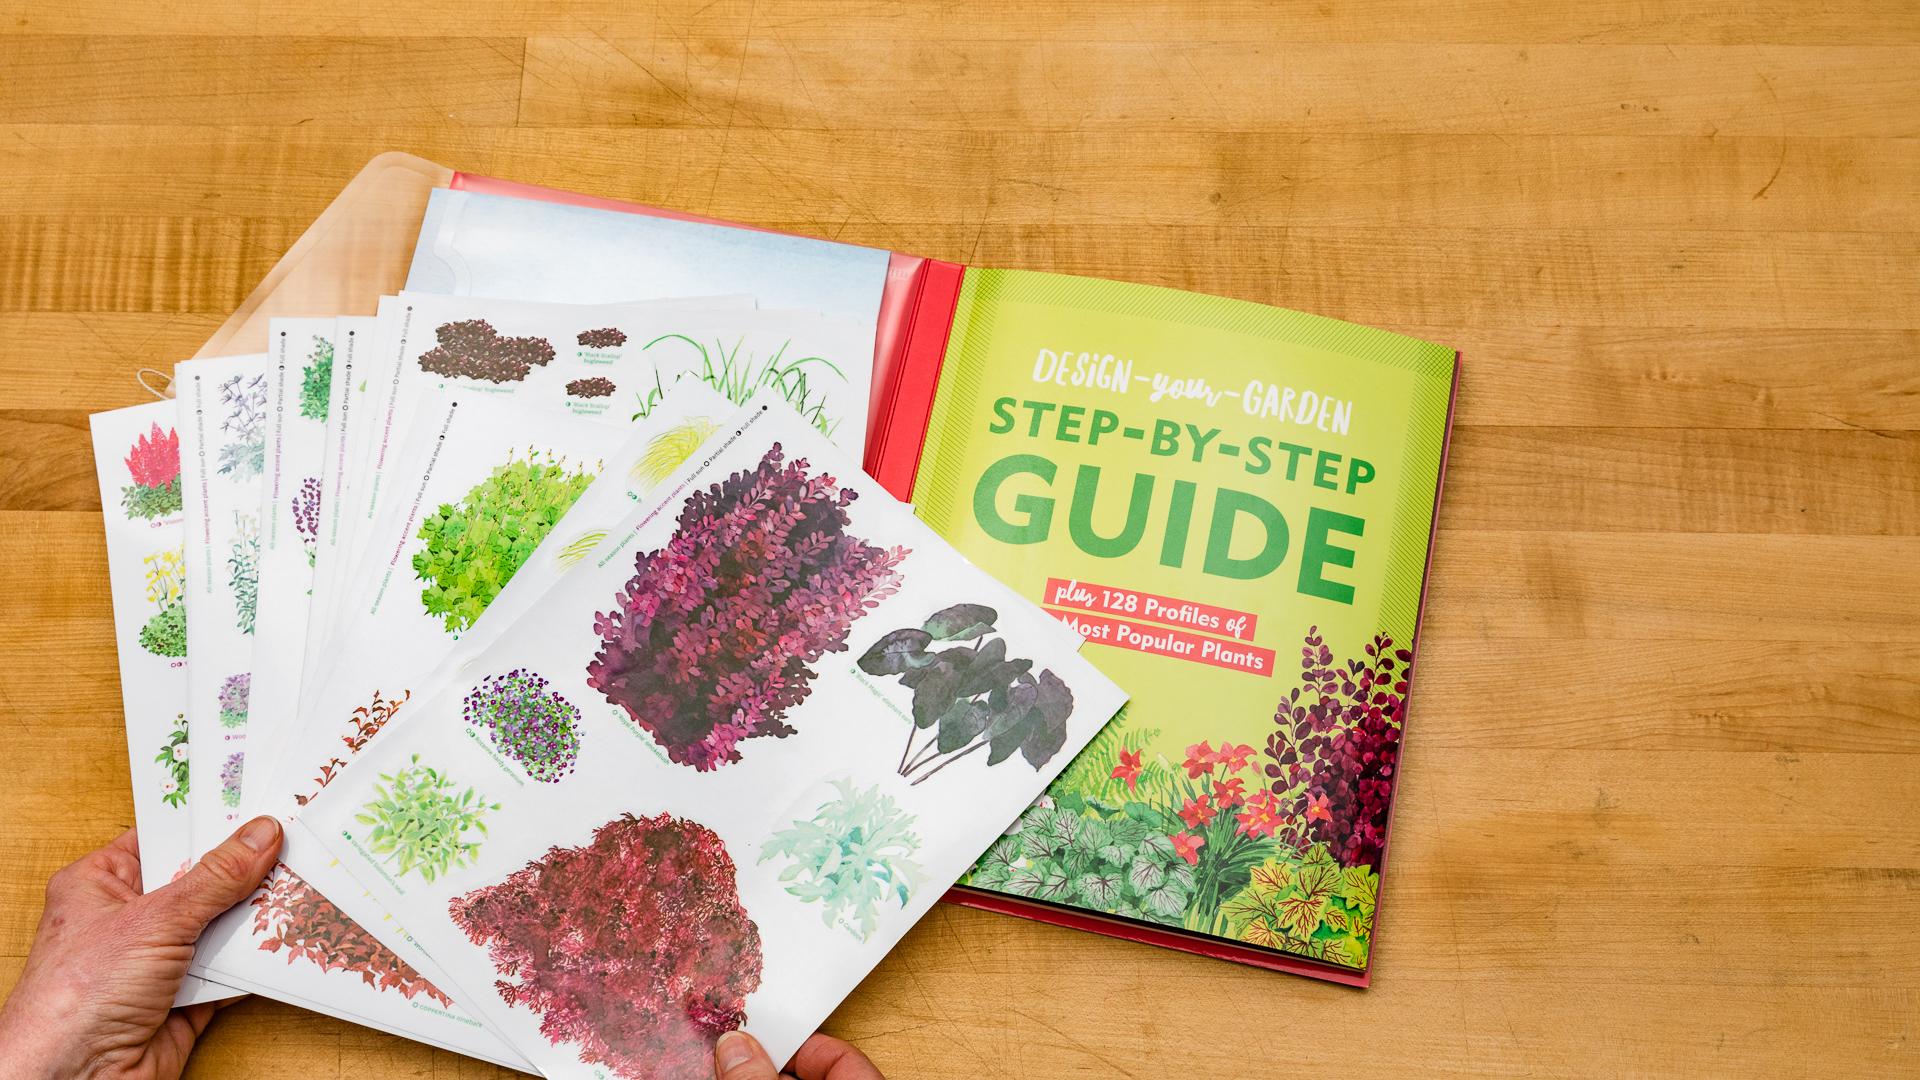  Inside are 150 reusable cling stickers of popular plants that grow well in most temperate gardens. 